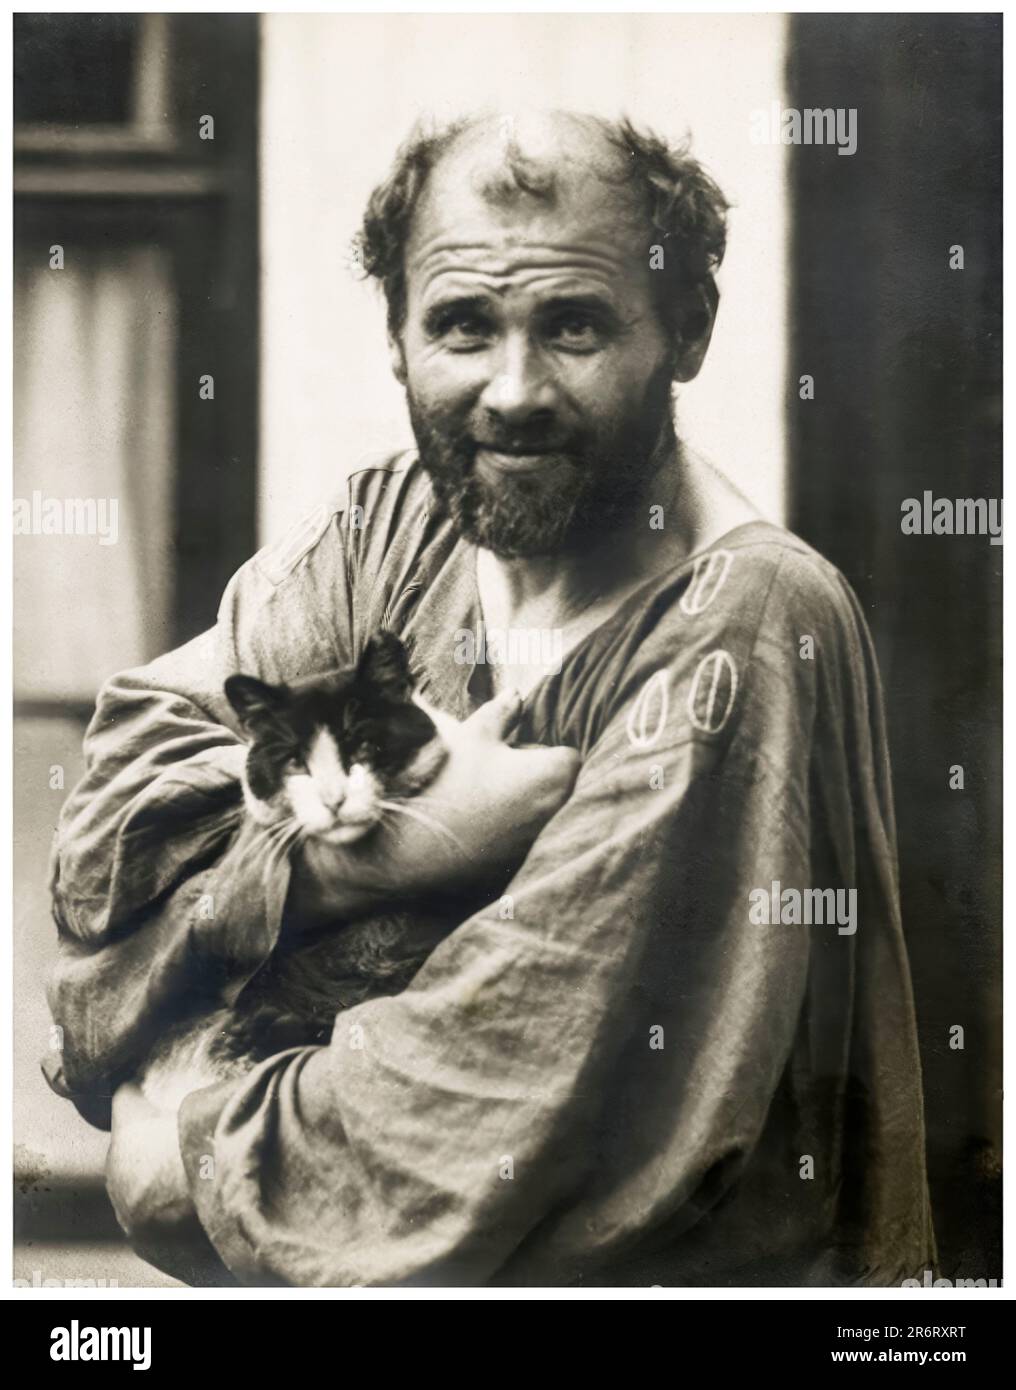 Gustav Klimt (1862-1918) with a cat, portrait photograph in silver print by Moritz Nähr, 1911 Stock Photo